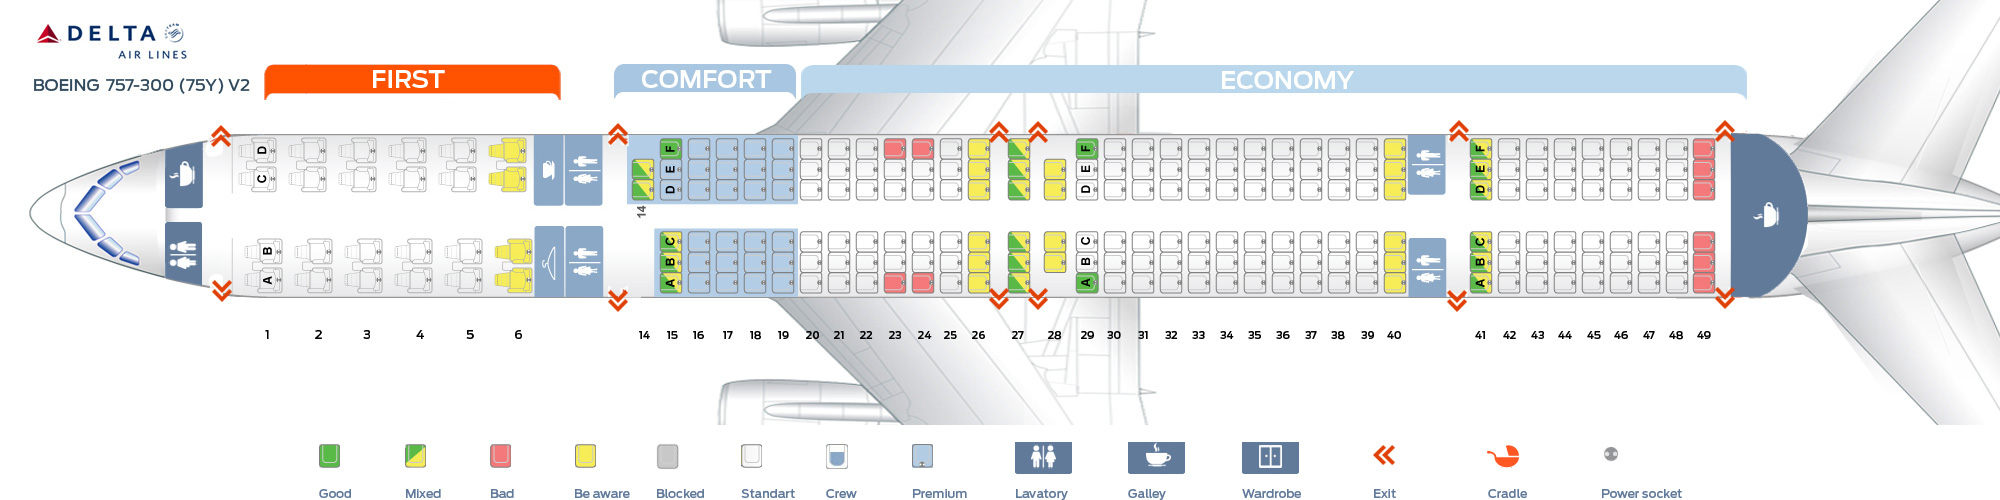 Seat Map Boeing 757 300 Delta Airlines Best Seats In Plane